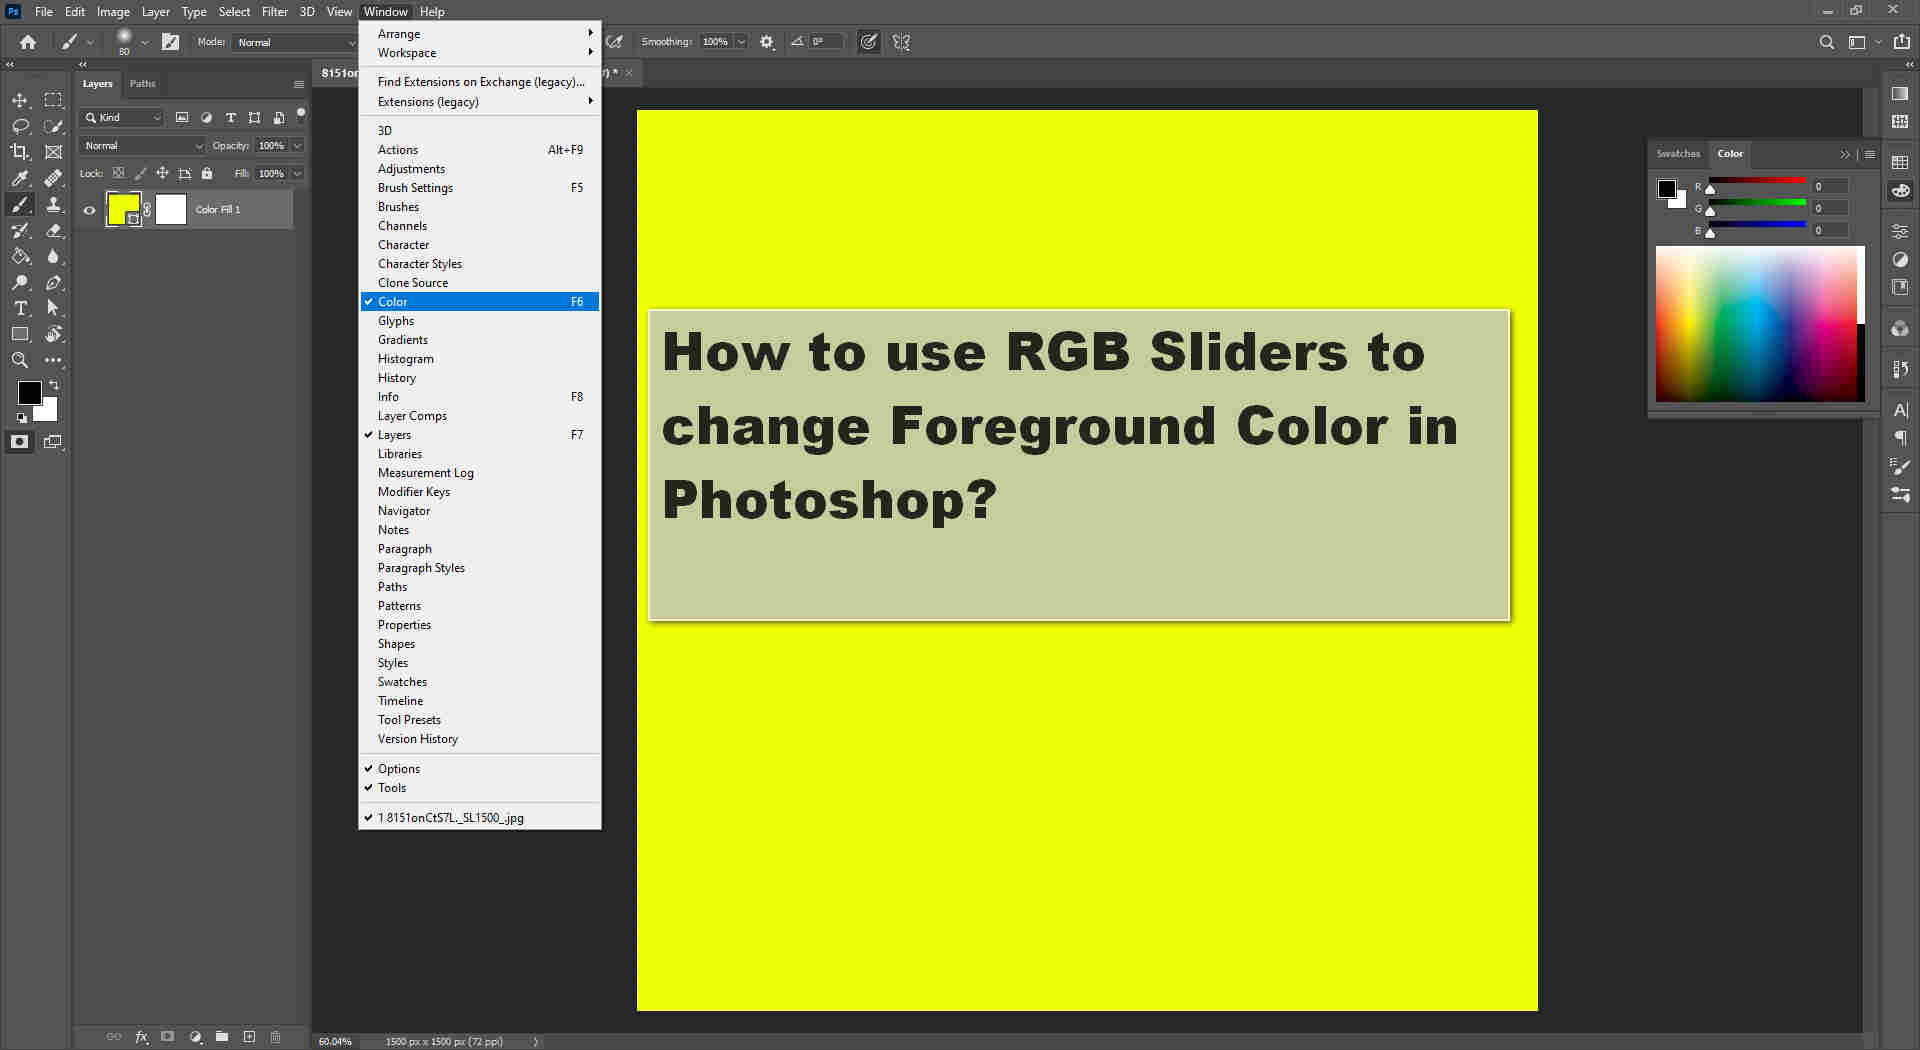 How to use RGB Sliders to change Foreground Color in